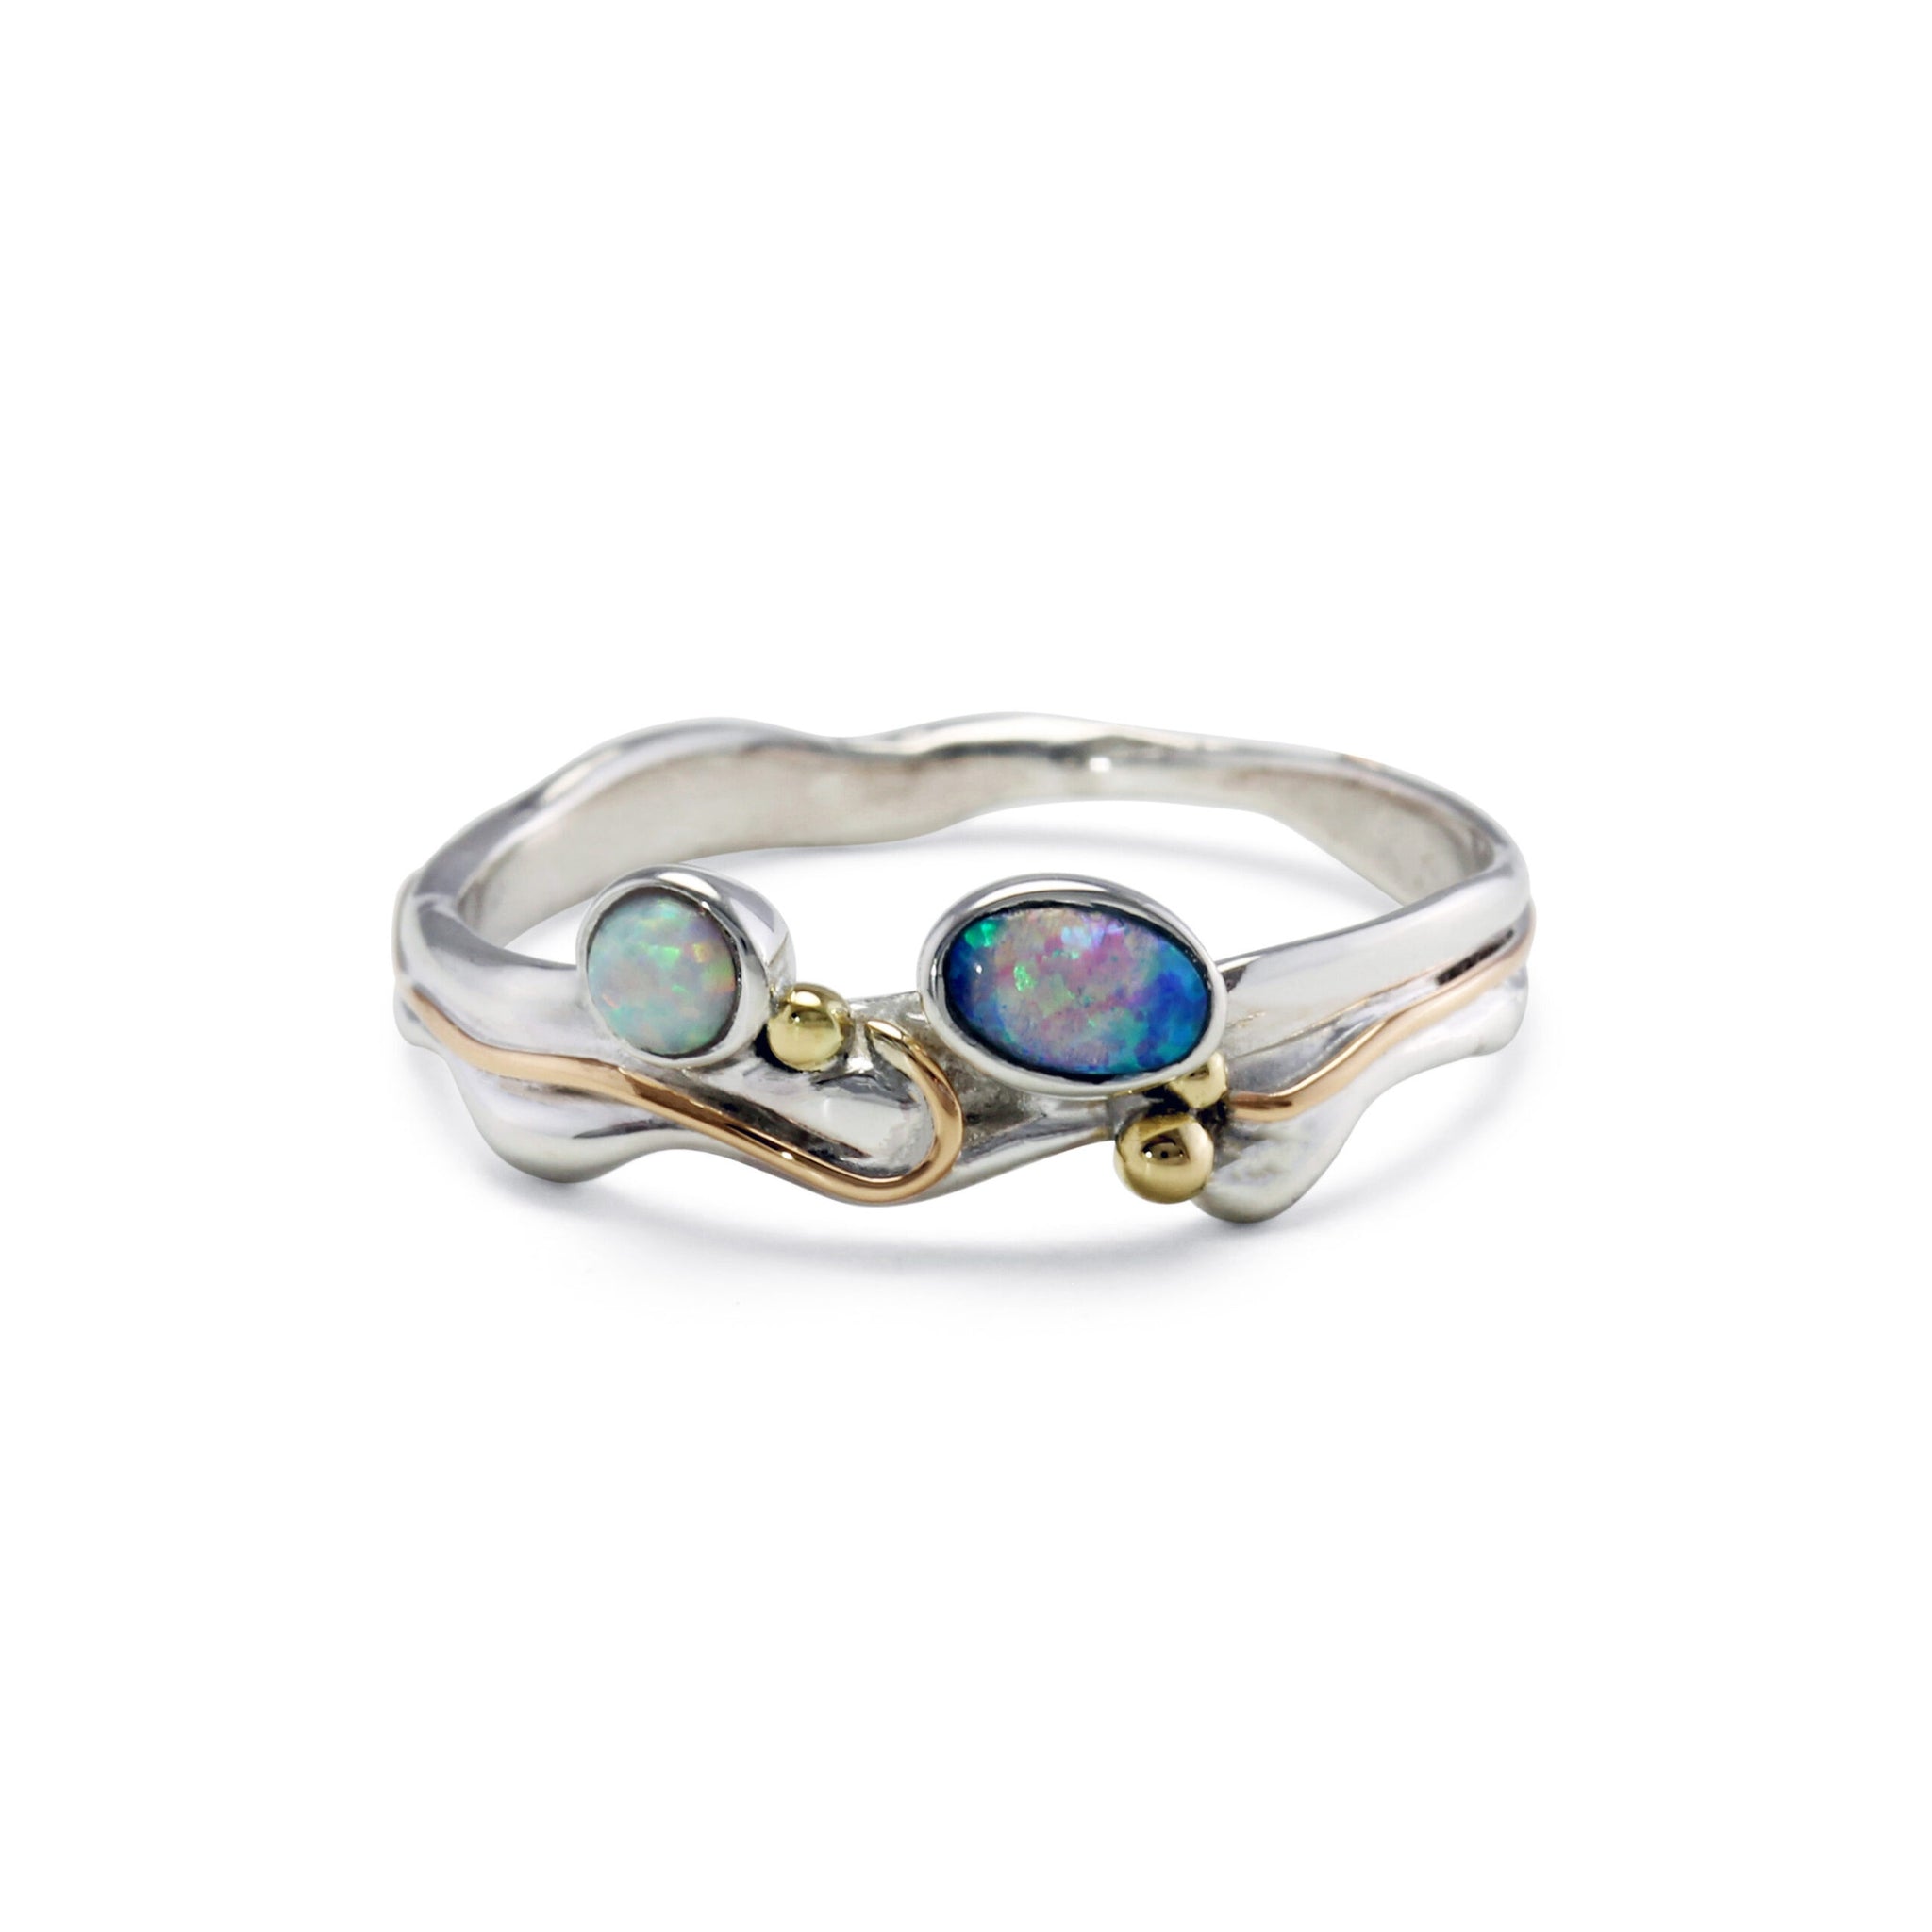 Silver & Turquoise Opalite Ring